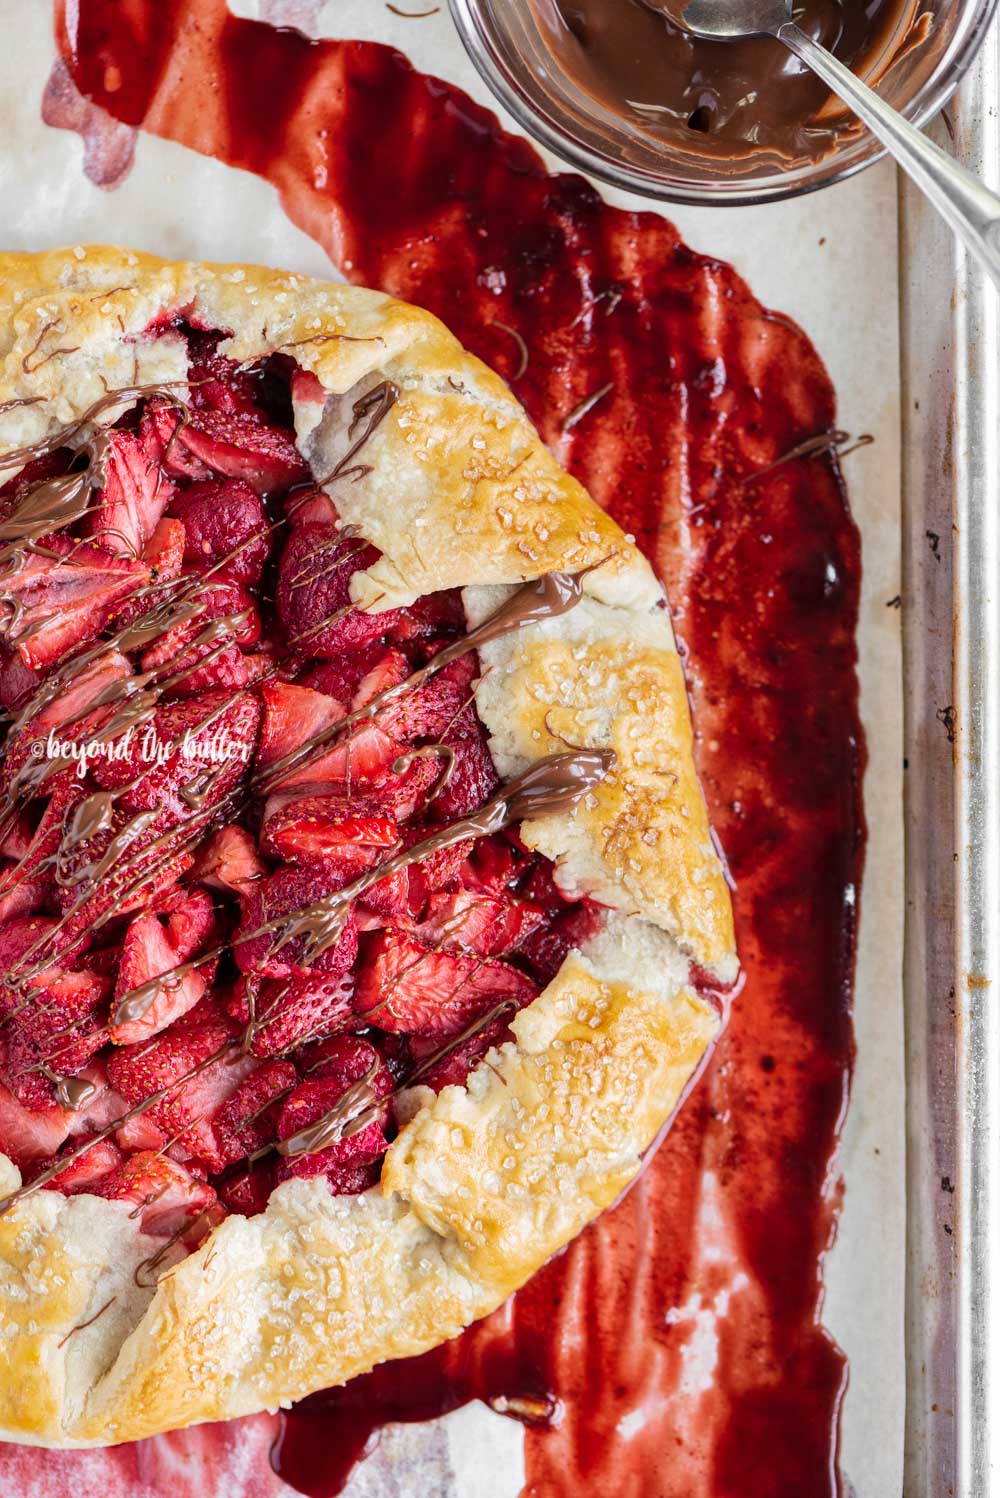 Overhead image of a Berry Nutella Galette on a baking sheet with Nutella drizzled over the top.